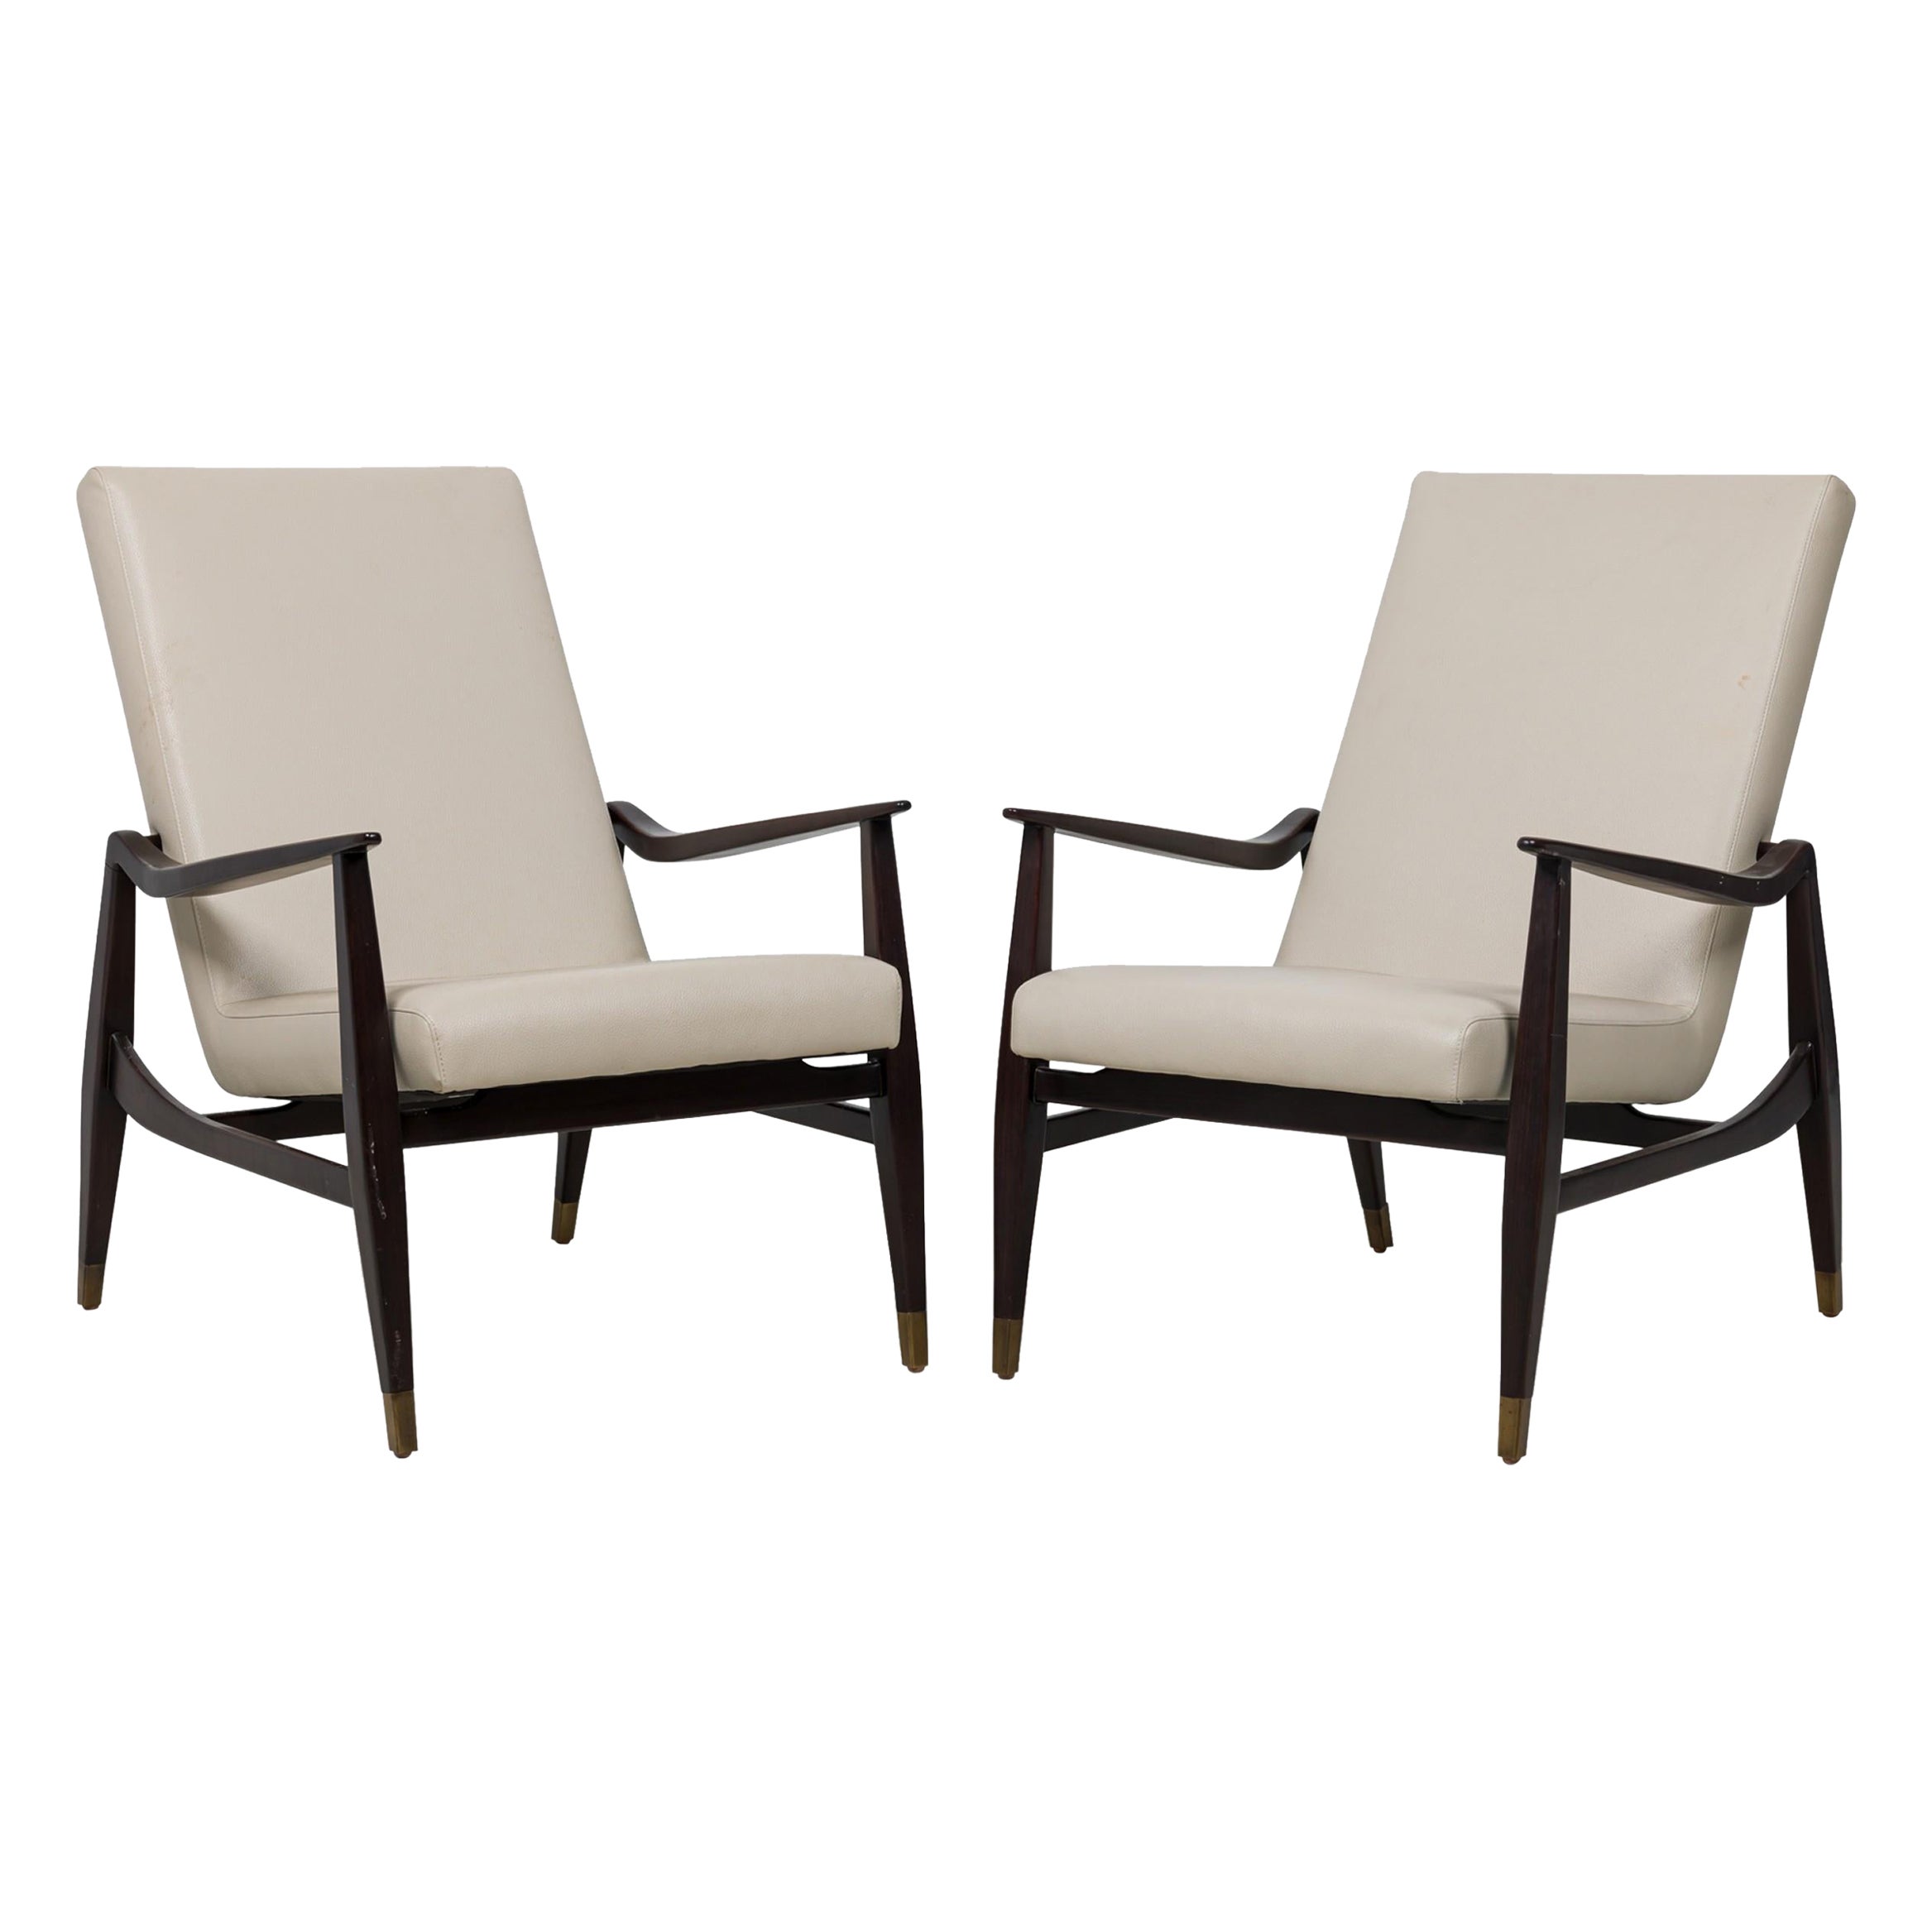 Pair of Contemporary American Beige Pebbled Leather Upholstered Armchairs